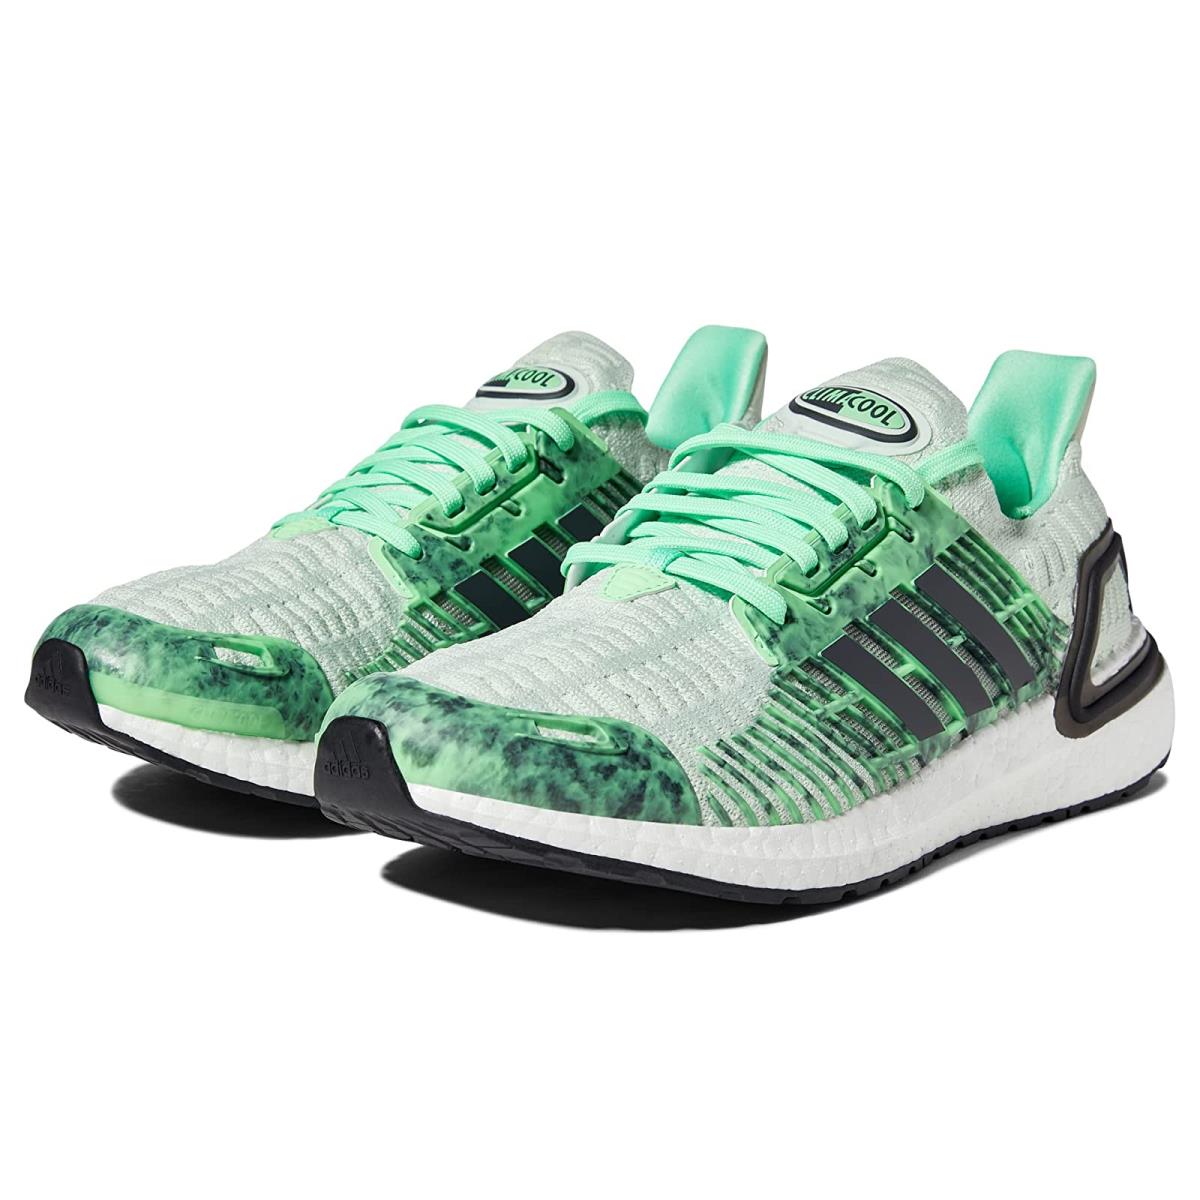 Man`s Sneakers Athletic Shoes Adidas Running Ultraboost CC-1 Dna Linen Green/Carbon/Black